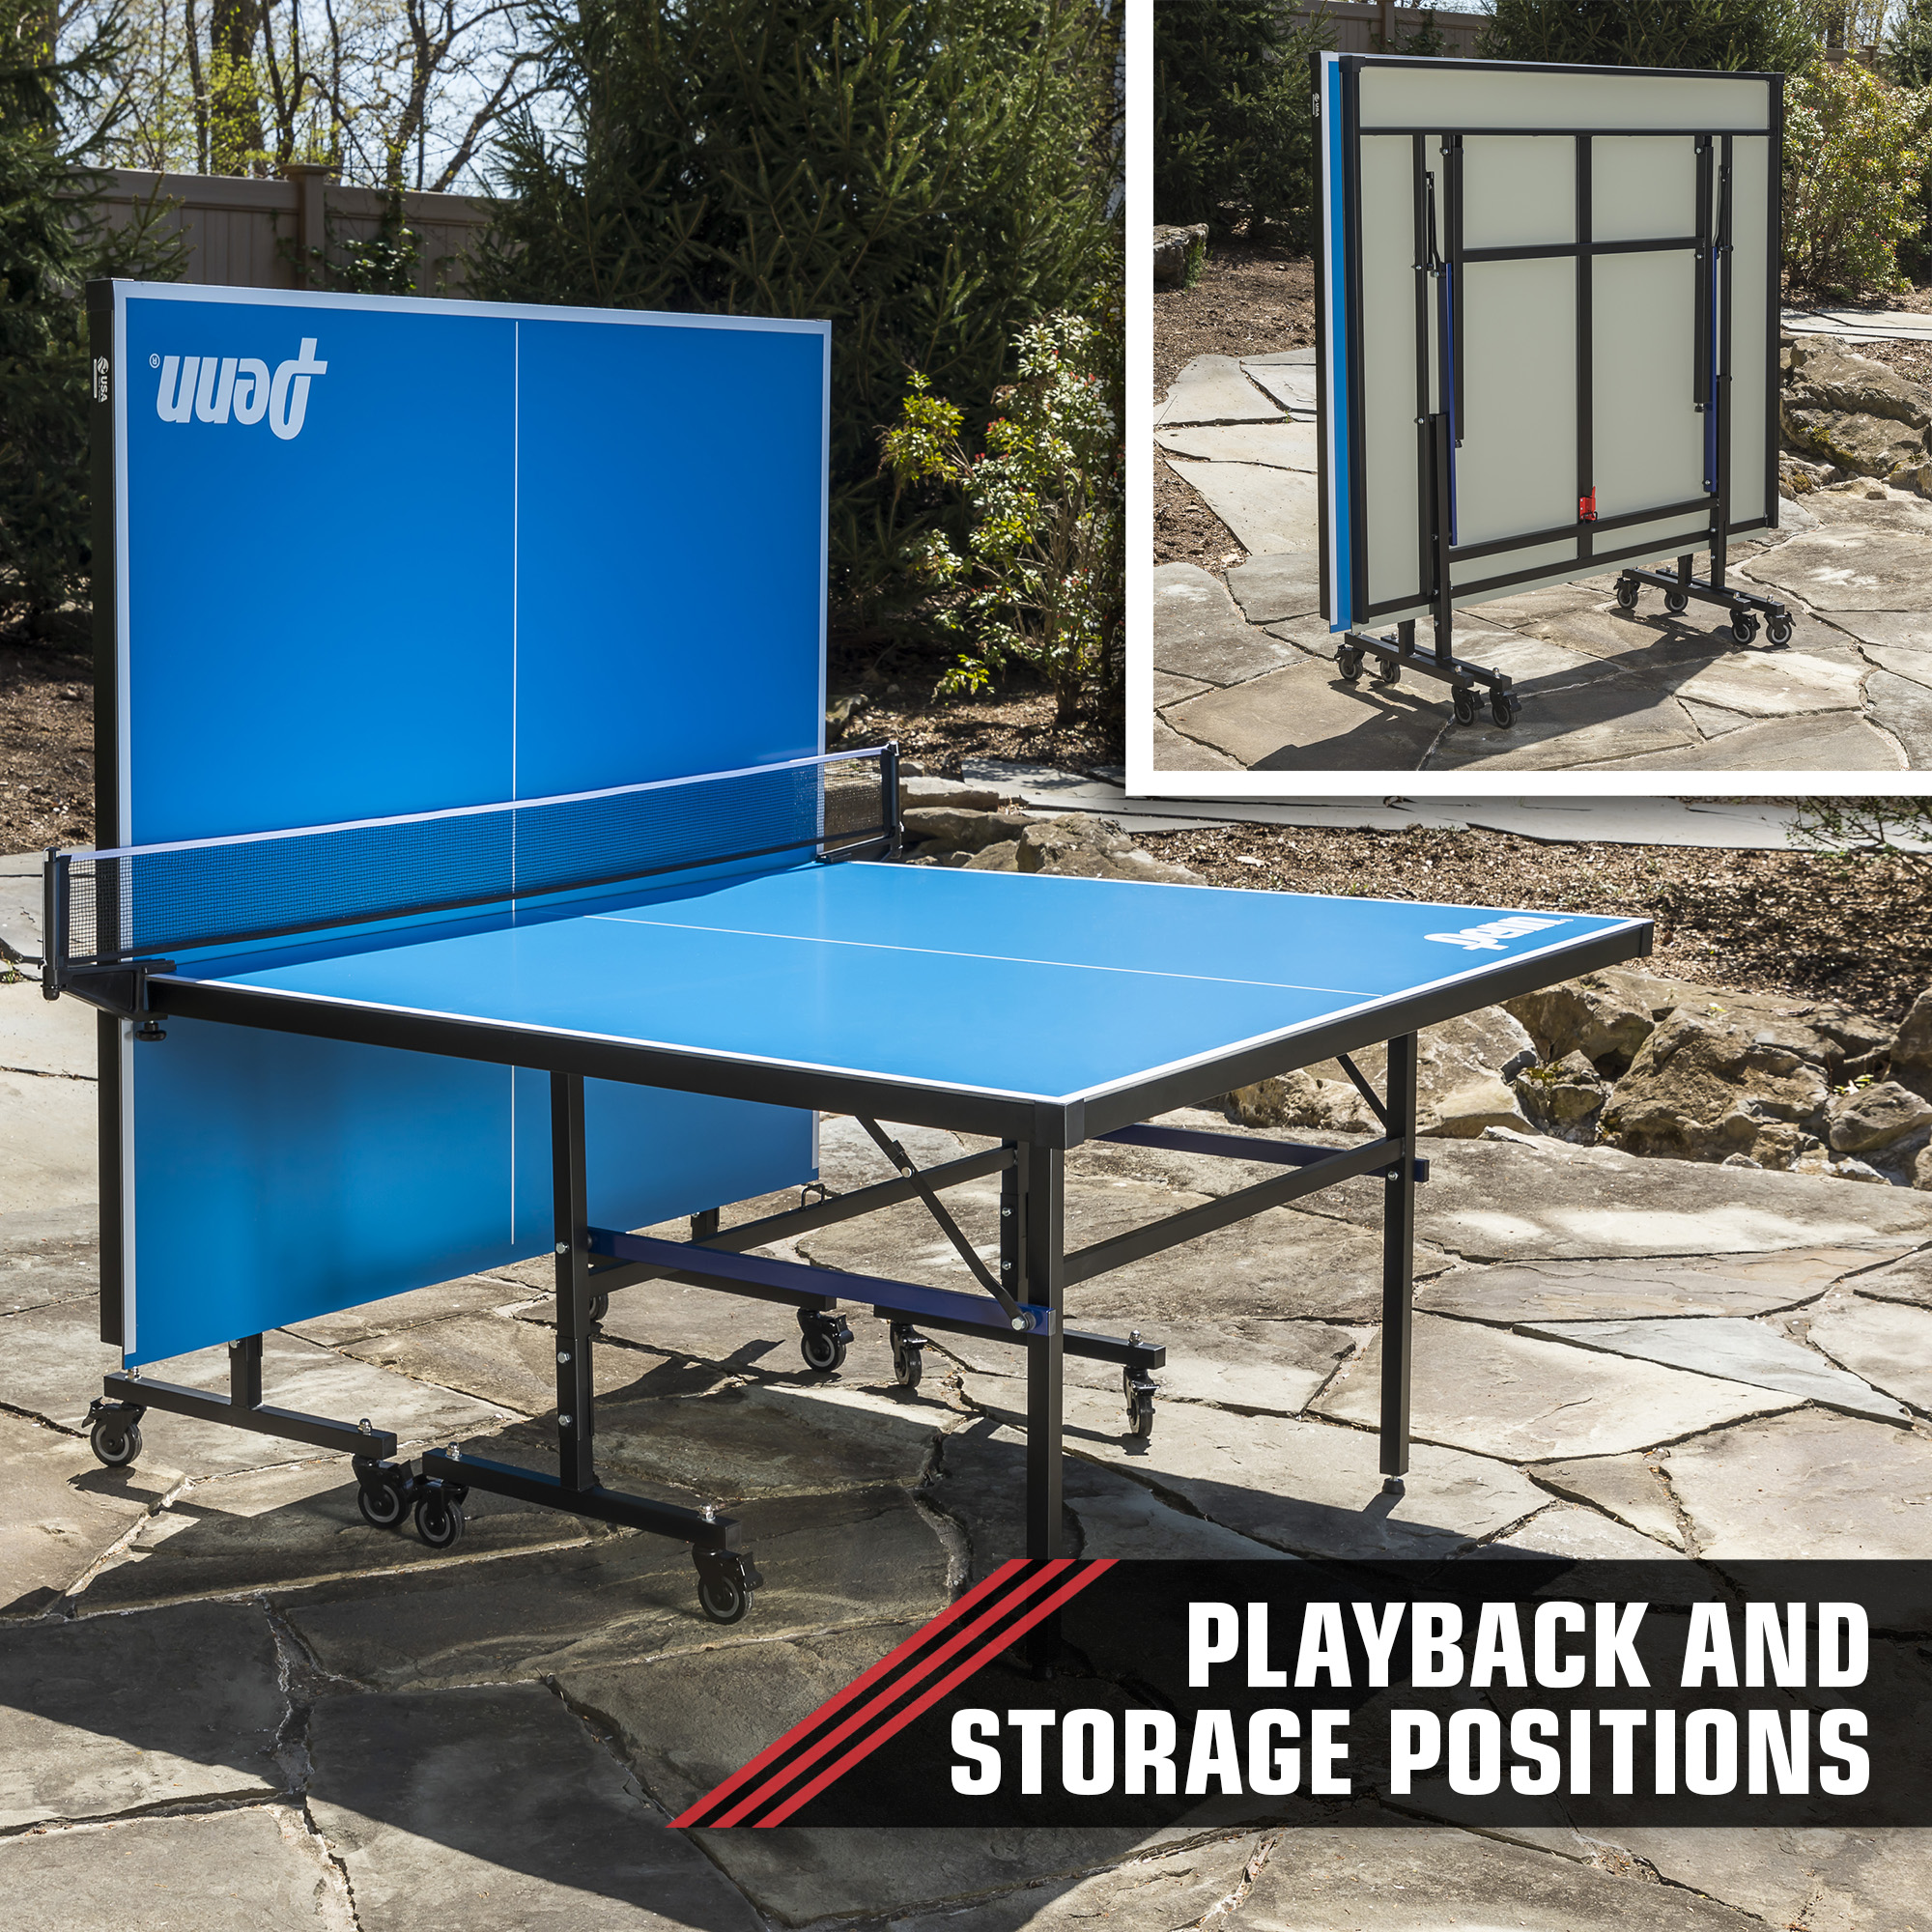 Penn Acadia Outdoor Table Tennis Table with Cover; 10 Minute Setup - image 4 of 11